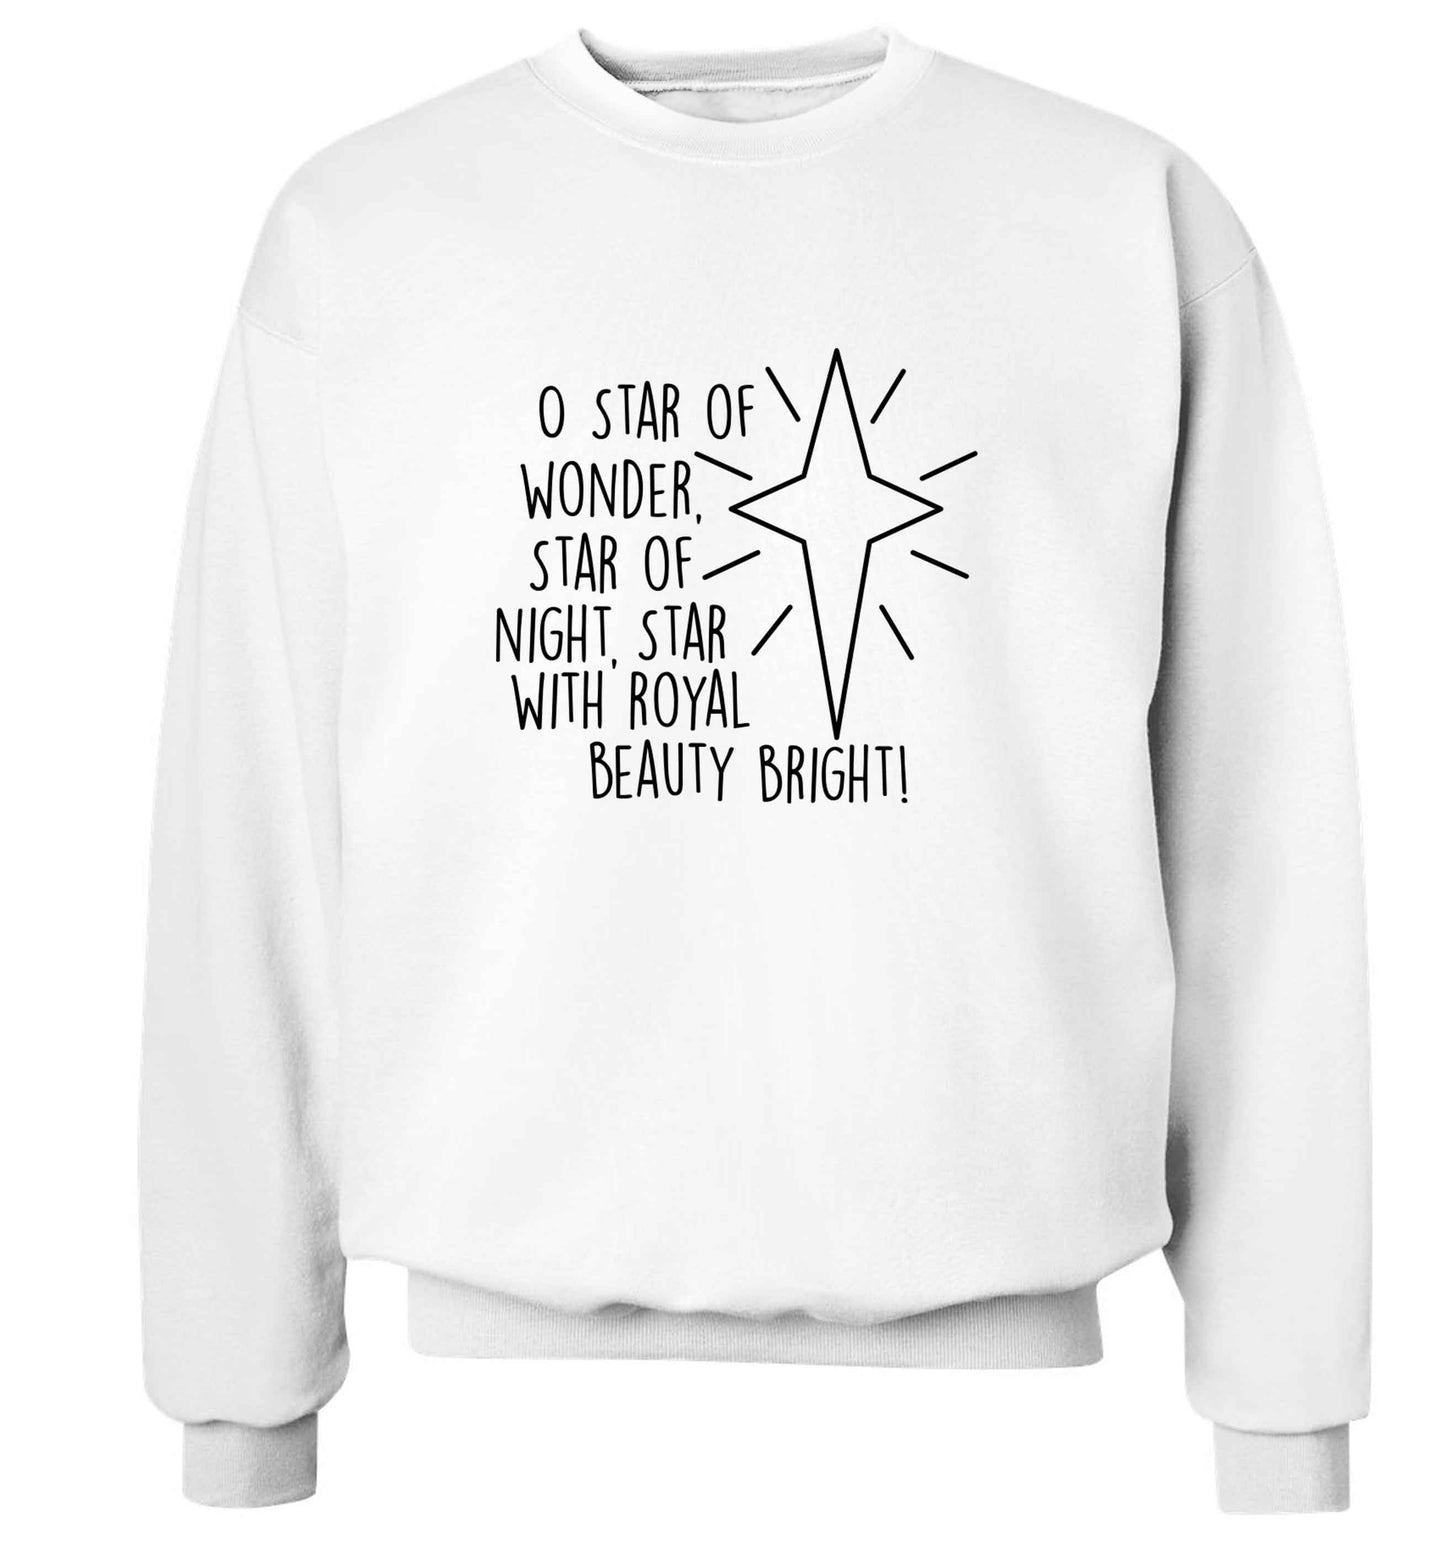 Oh star of wonder star of night, star with royal beauty bright adult's unisex white sweater 2XL